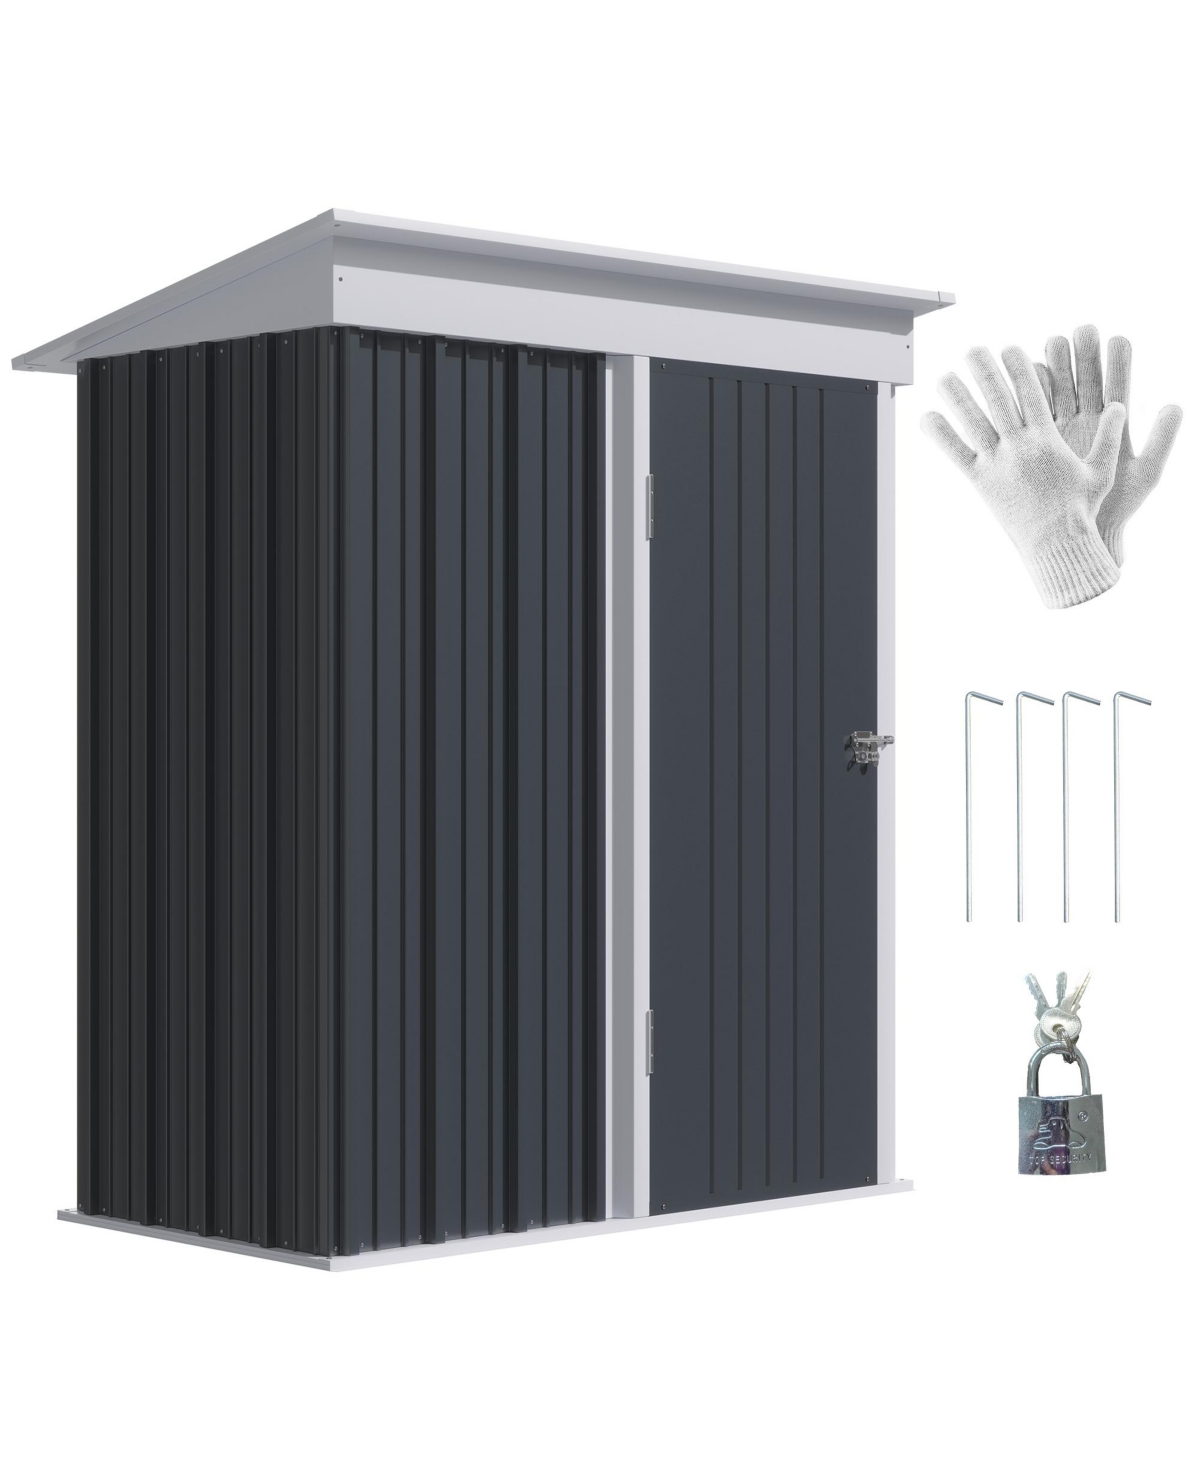 5' x 3' Steel Outdoor Storage Shed, Small Lean-to Shed for Garden, Tools, Tiny Metal Garage with Floor, Adjustable Shelf, Lock and Gloves for